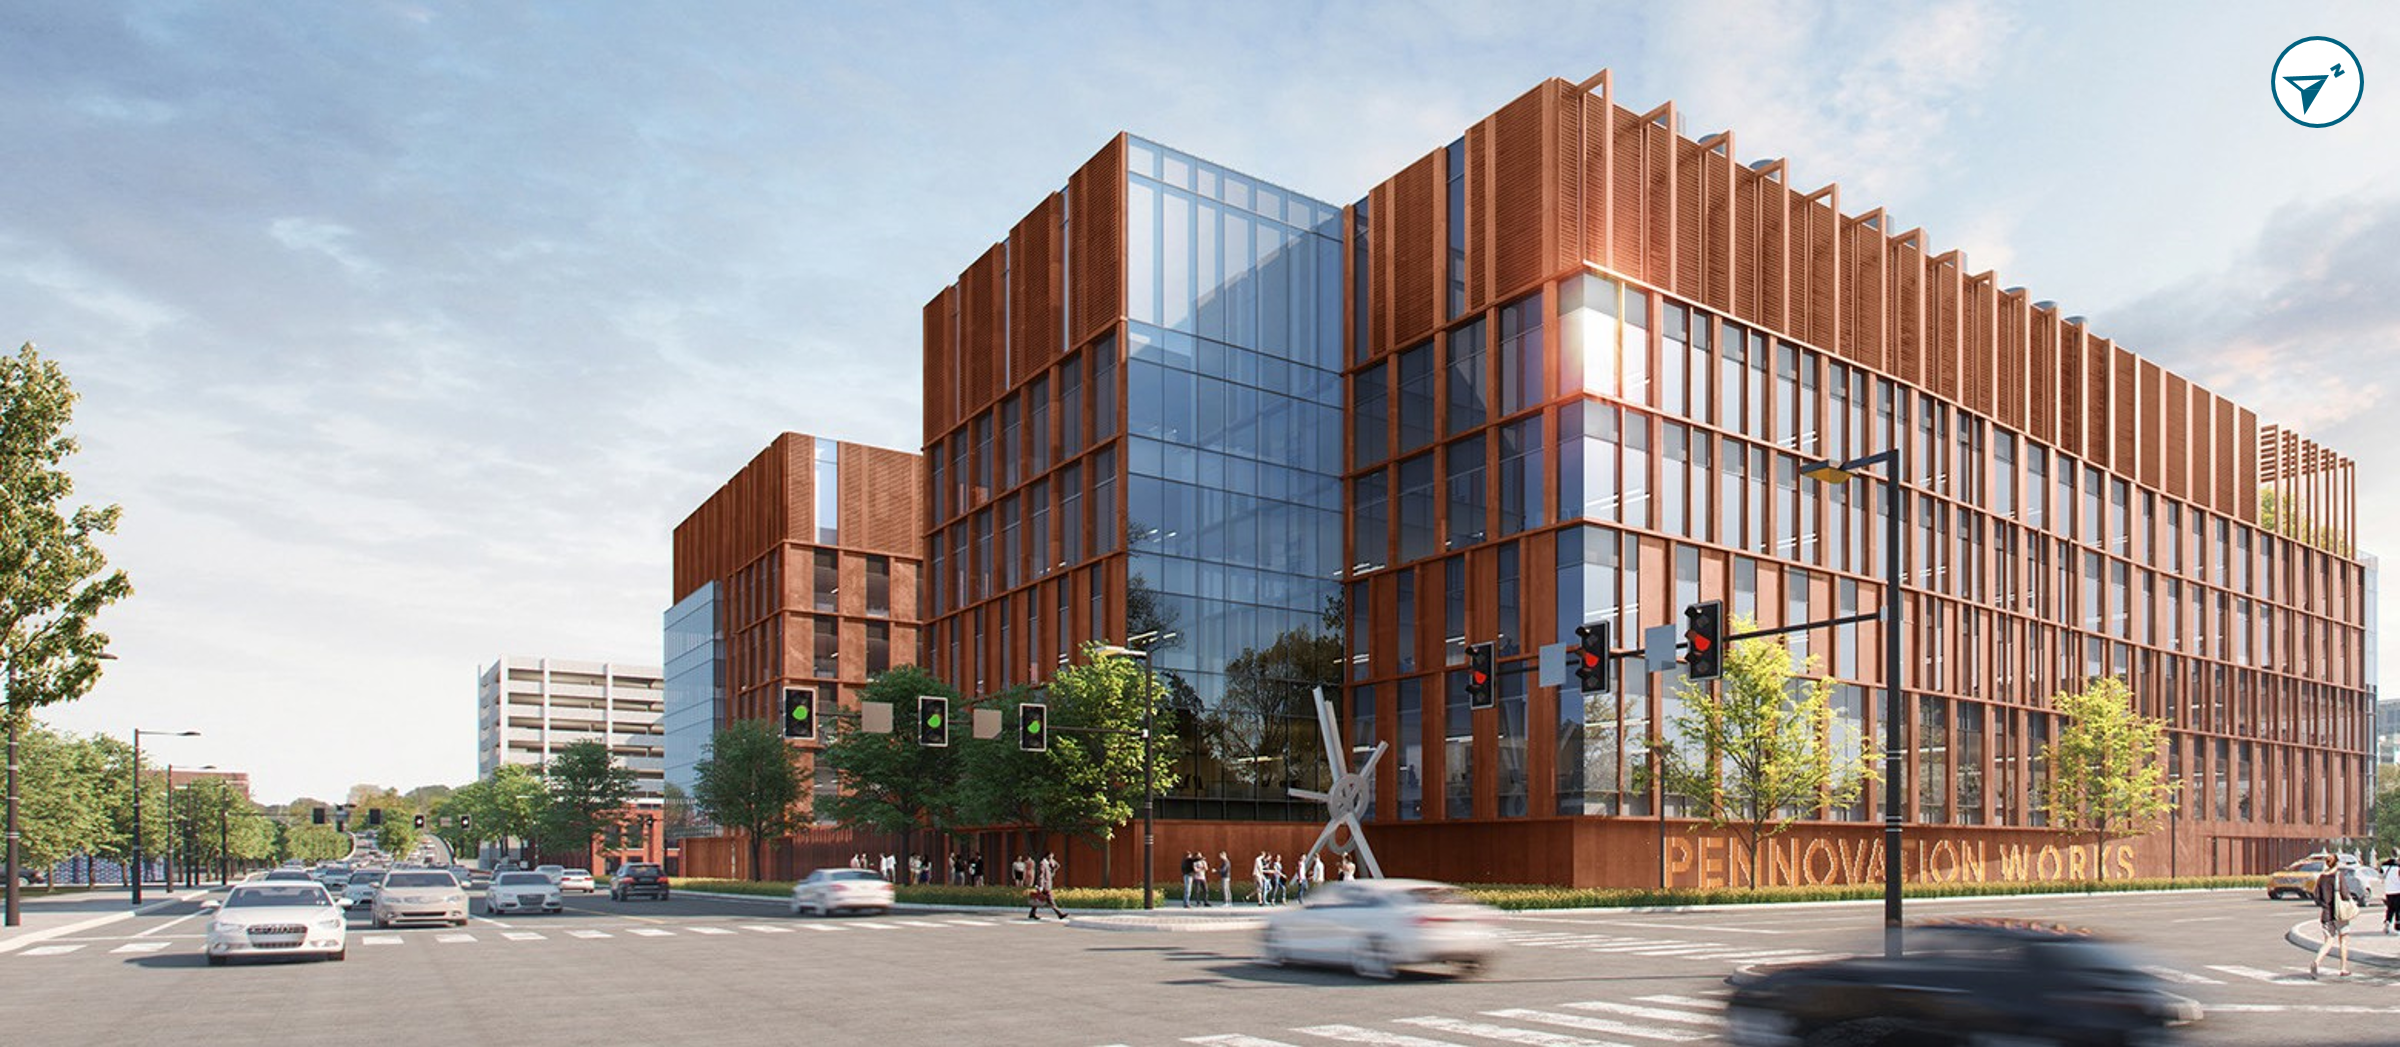 A rendering of a new building at Pennovation Works with glass and copper features